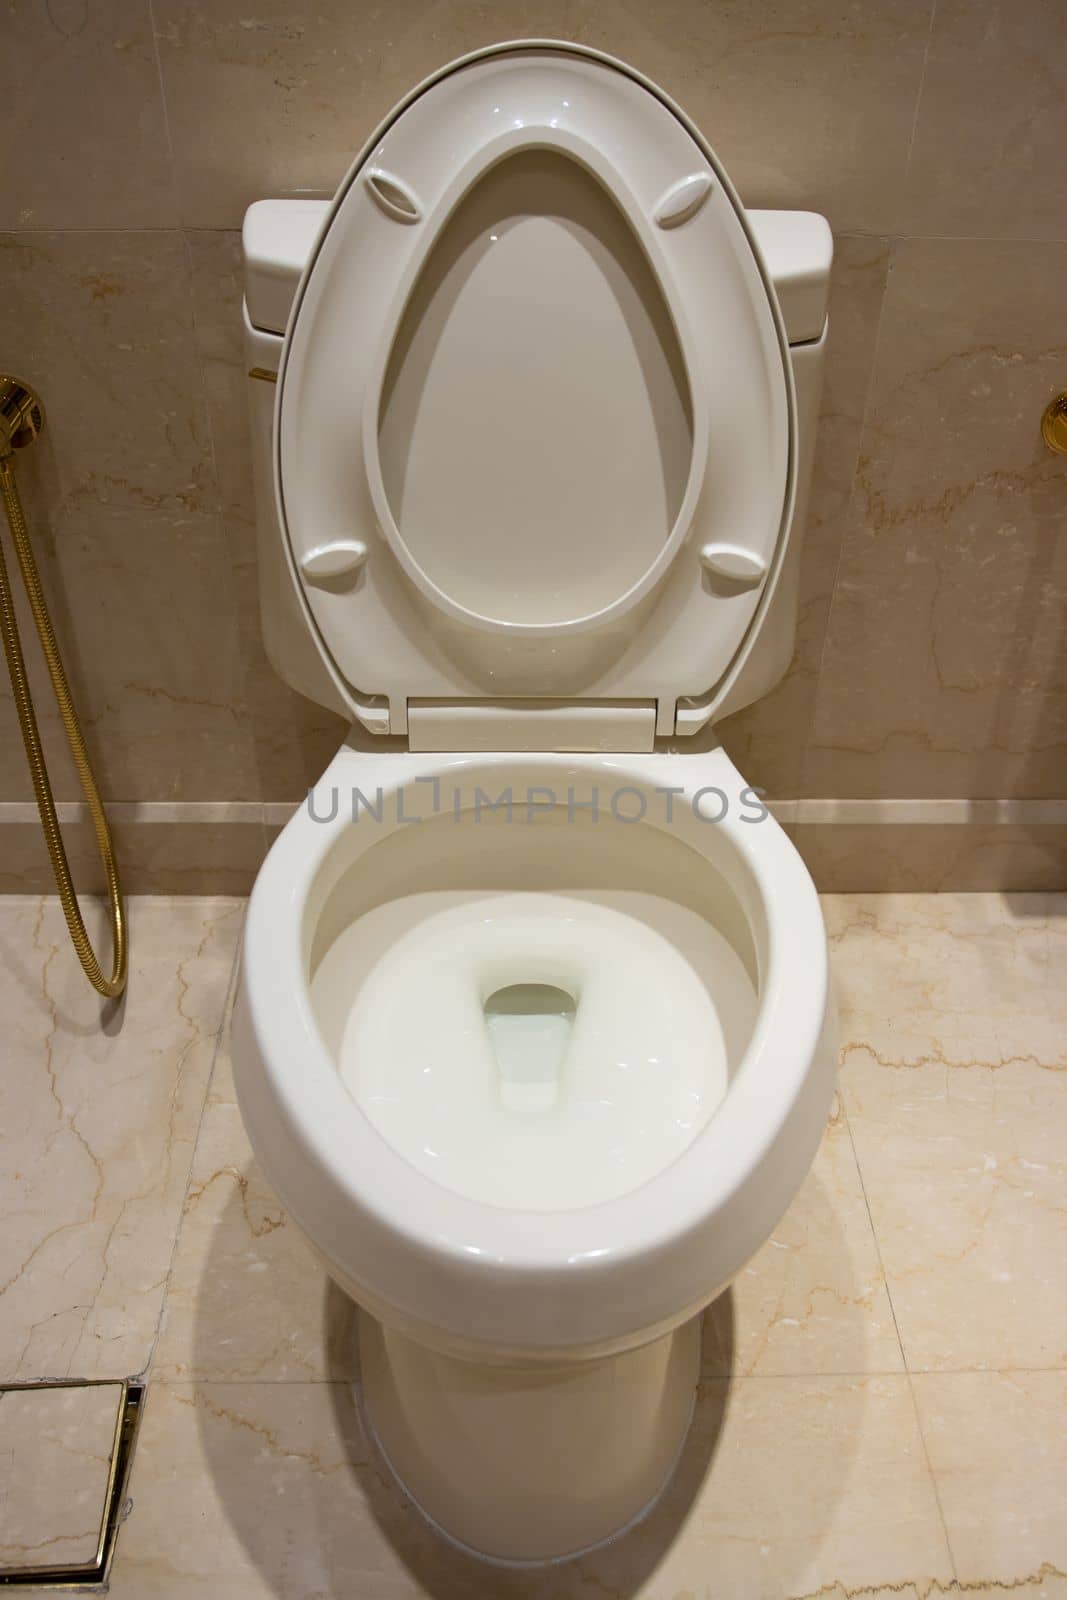 White toilet in the bathroom of an expensive house